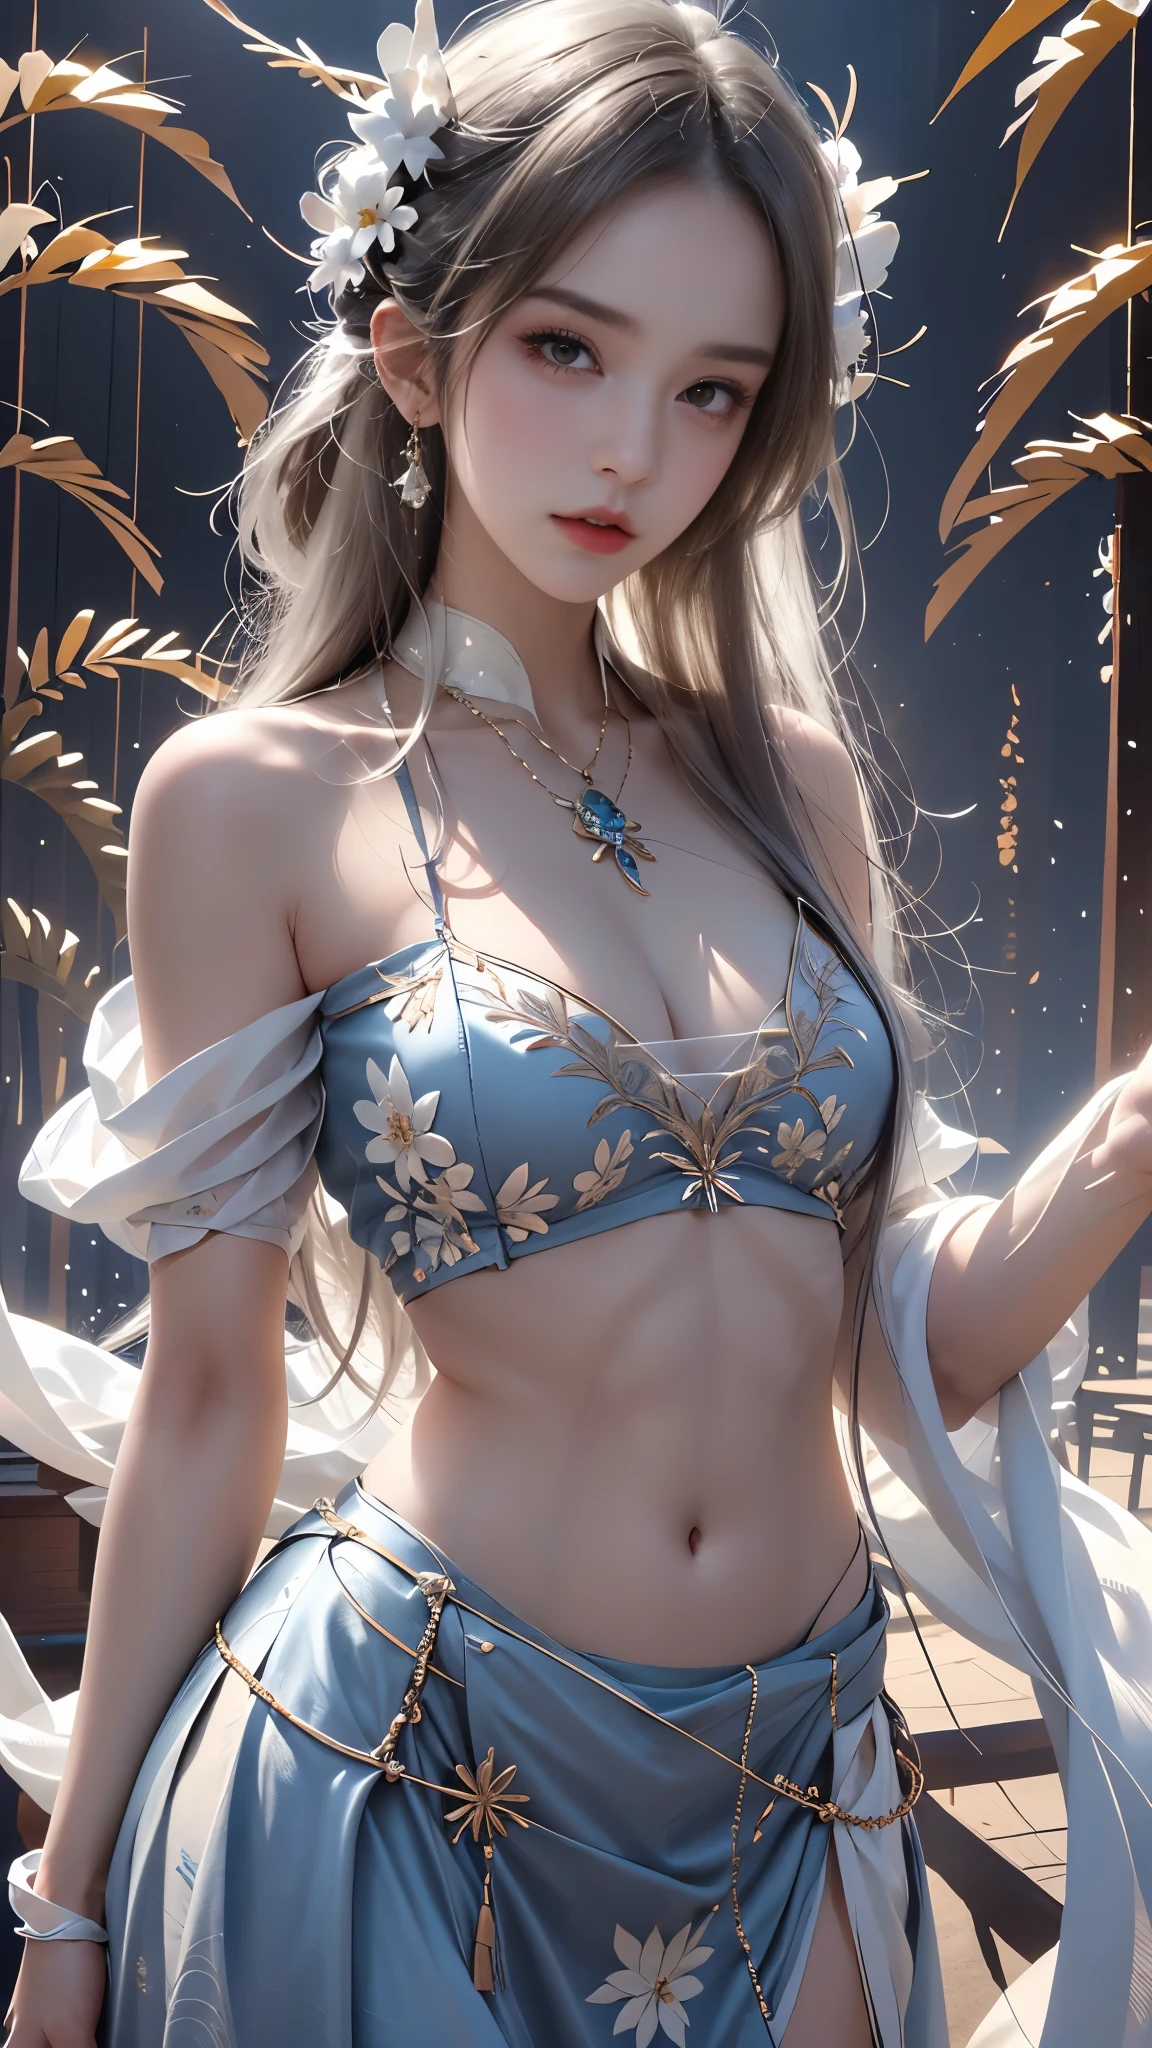 masterpiece，best quality，high quality，High definition，high quality的纹理，high quality的阴影，High details，Beautiful details，fine details，Extremely detailed CG，Detailed texture，lifelike面部表现，lifelike，colorful，Beautifully，sharp focus，(intricate details，Pure love face_v1:0.5)，(Beautifully face with beautiful details，(Beautifully eyes)，Perfectly proportioned face，HighSkin details，Skin details，The optimal ratio of four fingers to one thumb，emaciated:1.3)，1 girl，17 years old，High，(Smooth abdominal muscles:1.55)，(abdominal muscles:0.5)，beautiful，perfect，High，((Big breasts, big breasts, big breasts)), ((bare shoulders)), ((The skirt is very short)), (long legs)，(straight legs)，(thin waist)，((White skin))，White skin，((White skin))，(Emma Watson)，big breasts，((Caucasian))，Light blonde hair，Stand with your legs apart，looking at the audience，whole body，Portrait of cute blonde girl，((Standing in the wheat field,look into the distance))，bloom，orange mist，kinetic，strands of hair，lifelike，high quality渲染，amazing art，high quality，Film texture，Fuji XT3，dream